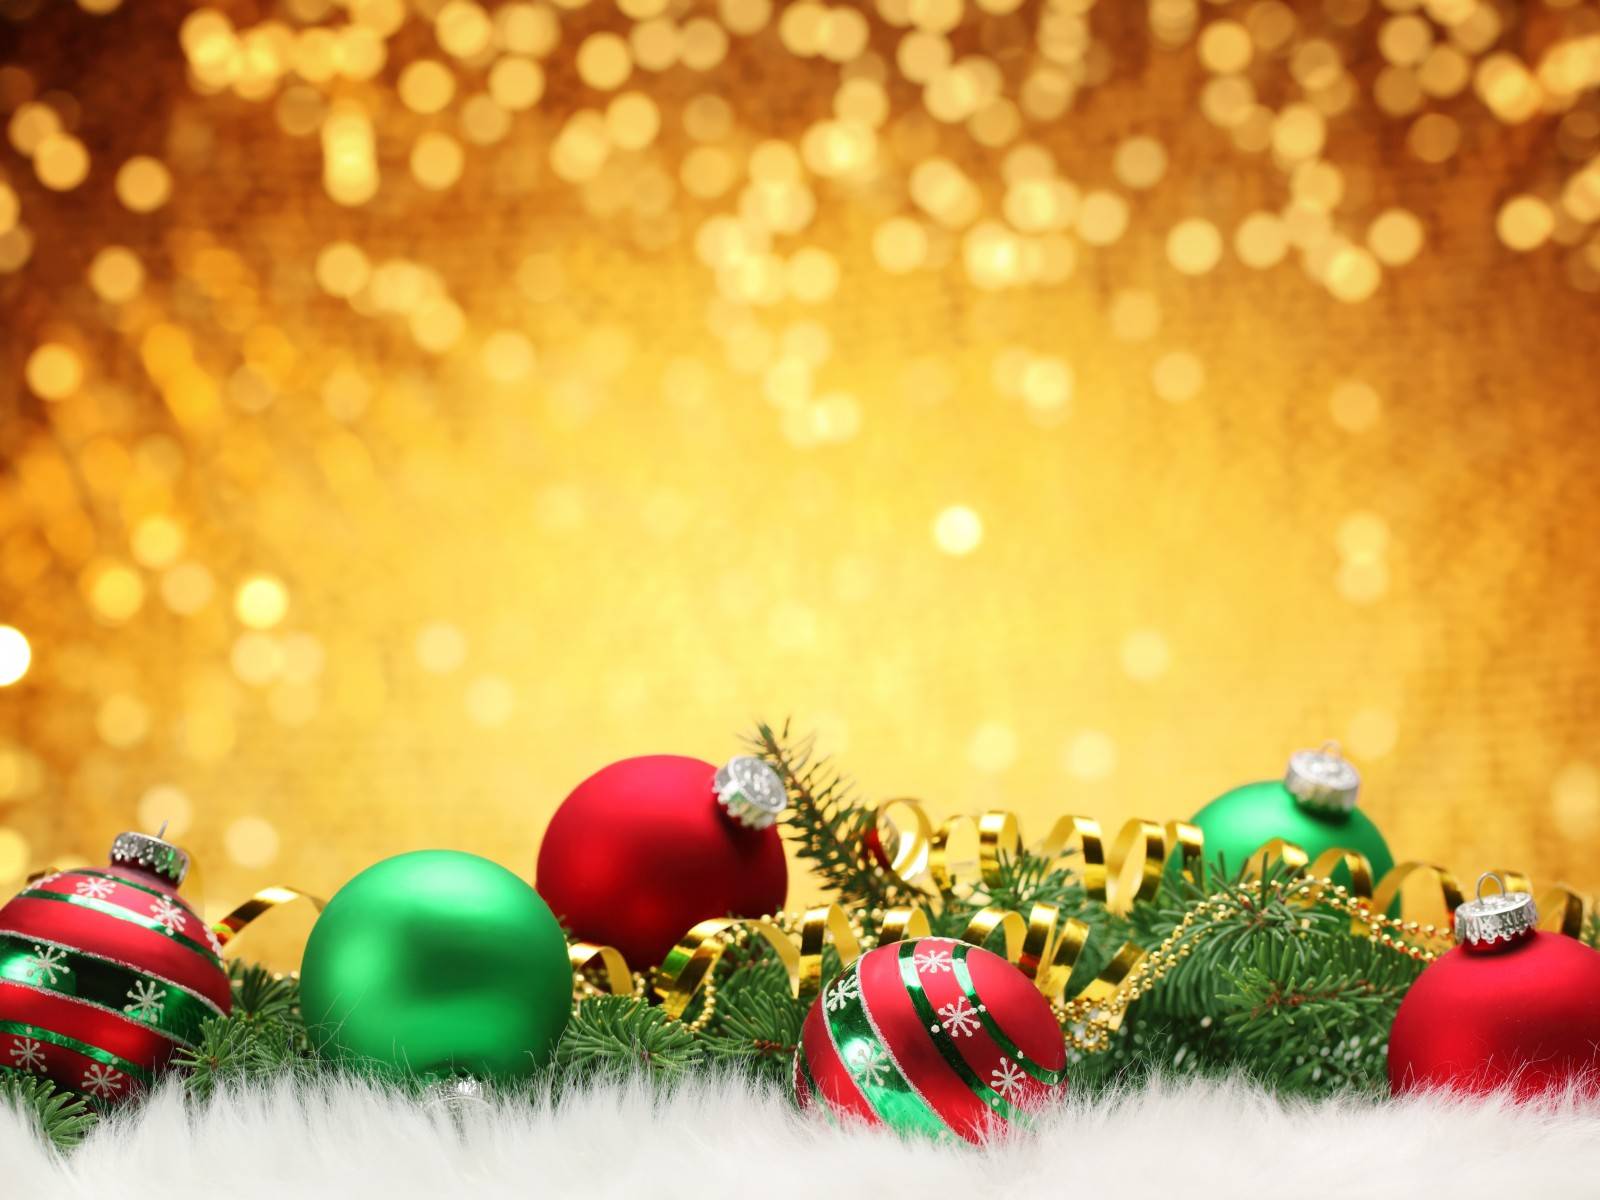 Backgrounds For Christmas Pictures - Wallpaper Zone